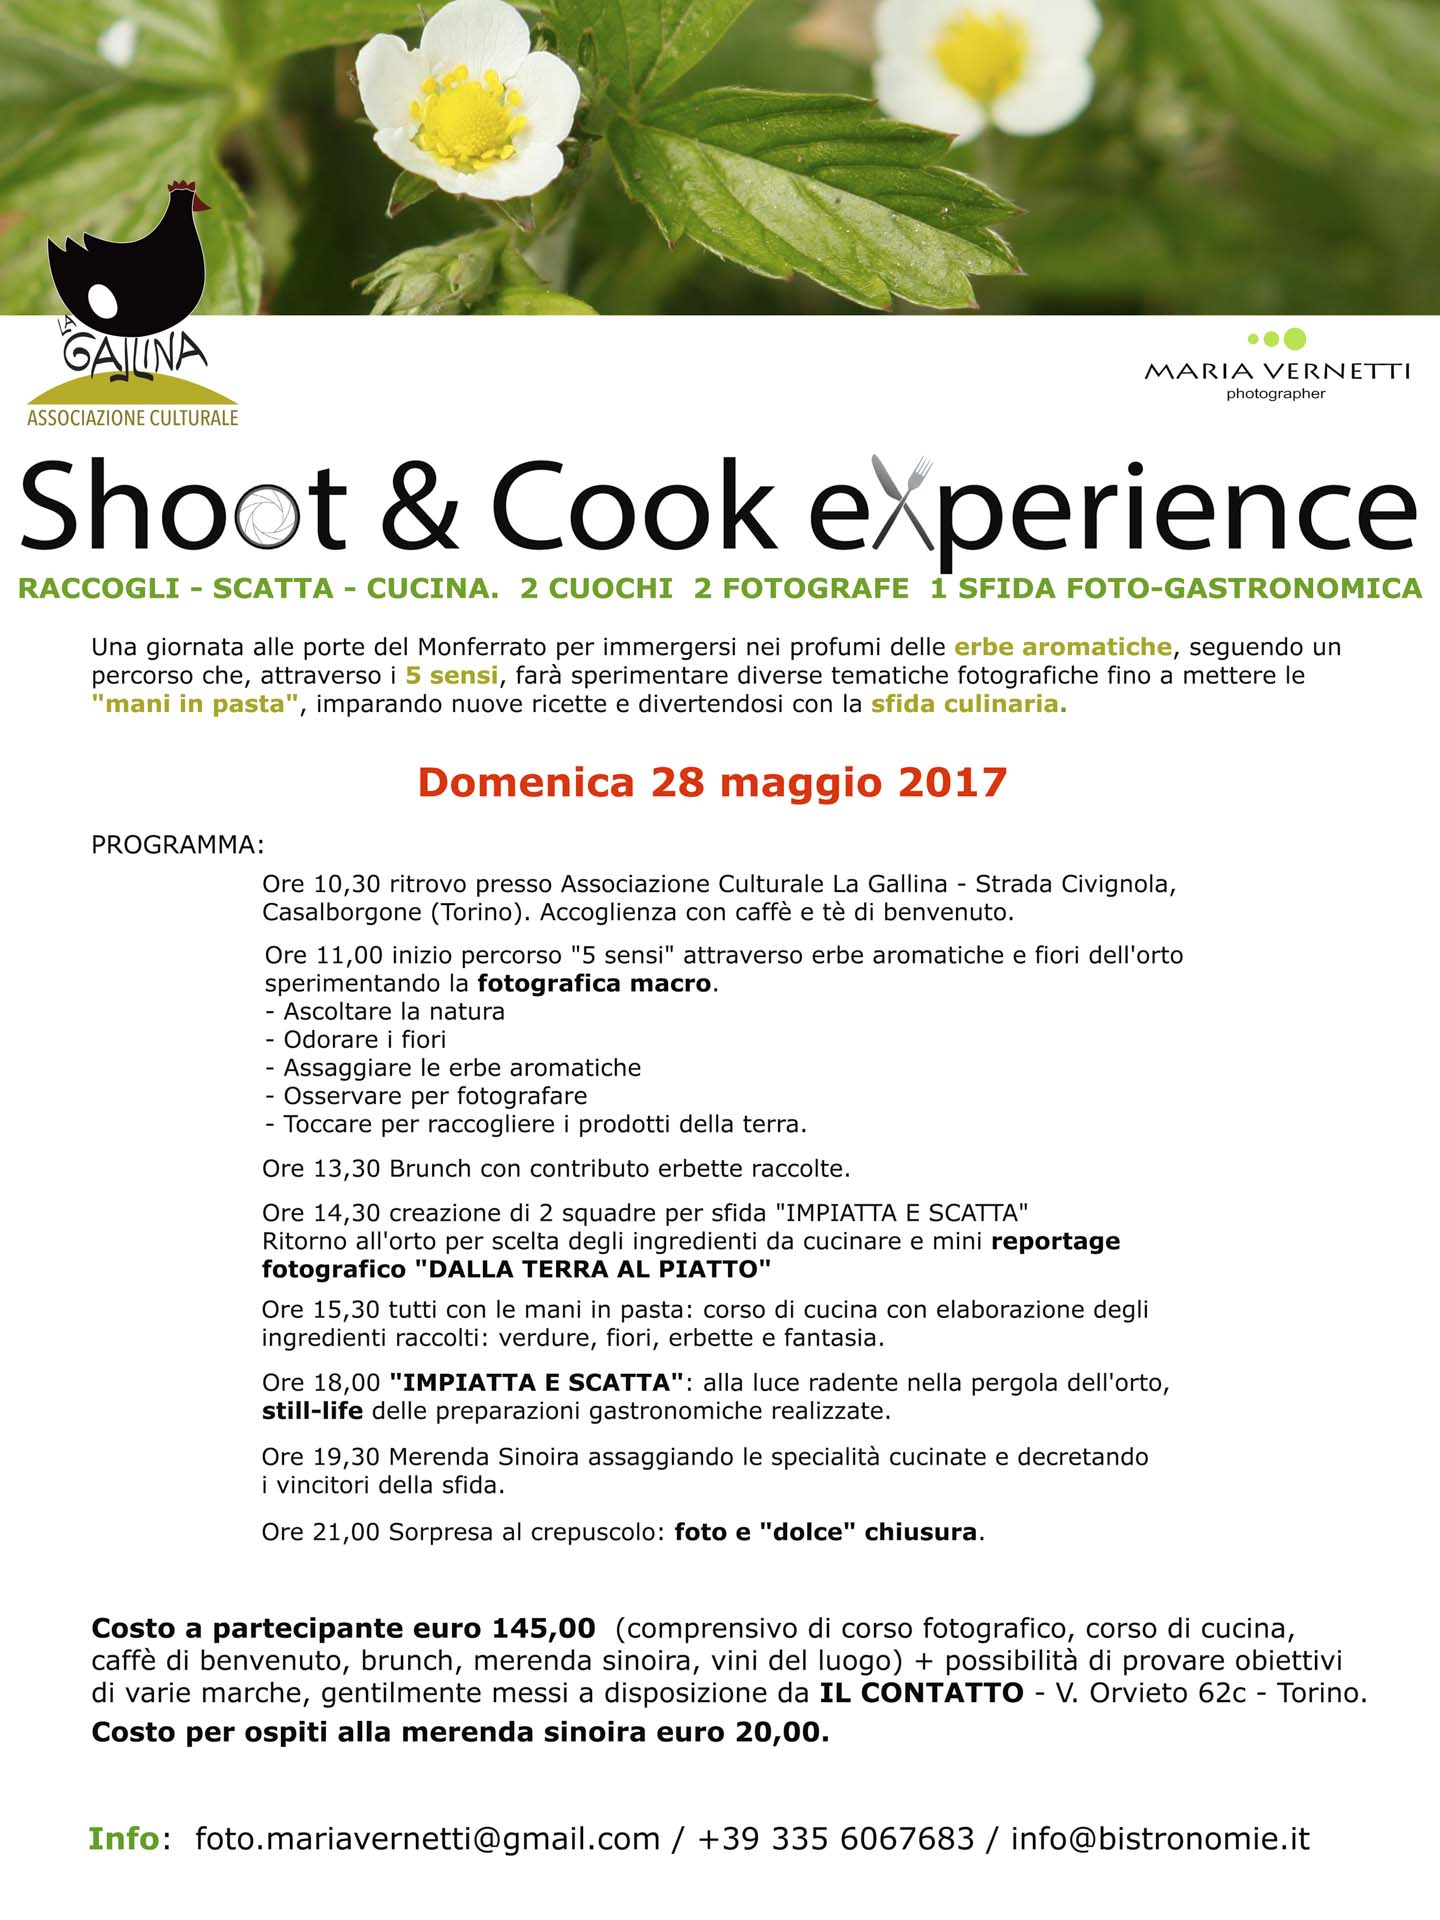 CORSI_WORKSHOP_MARIA_VERNETTI_009_Shoot & Cook Experience-28-5-17